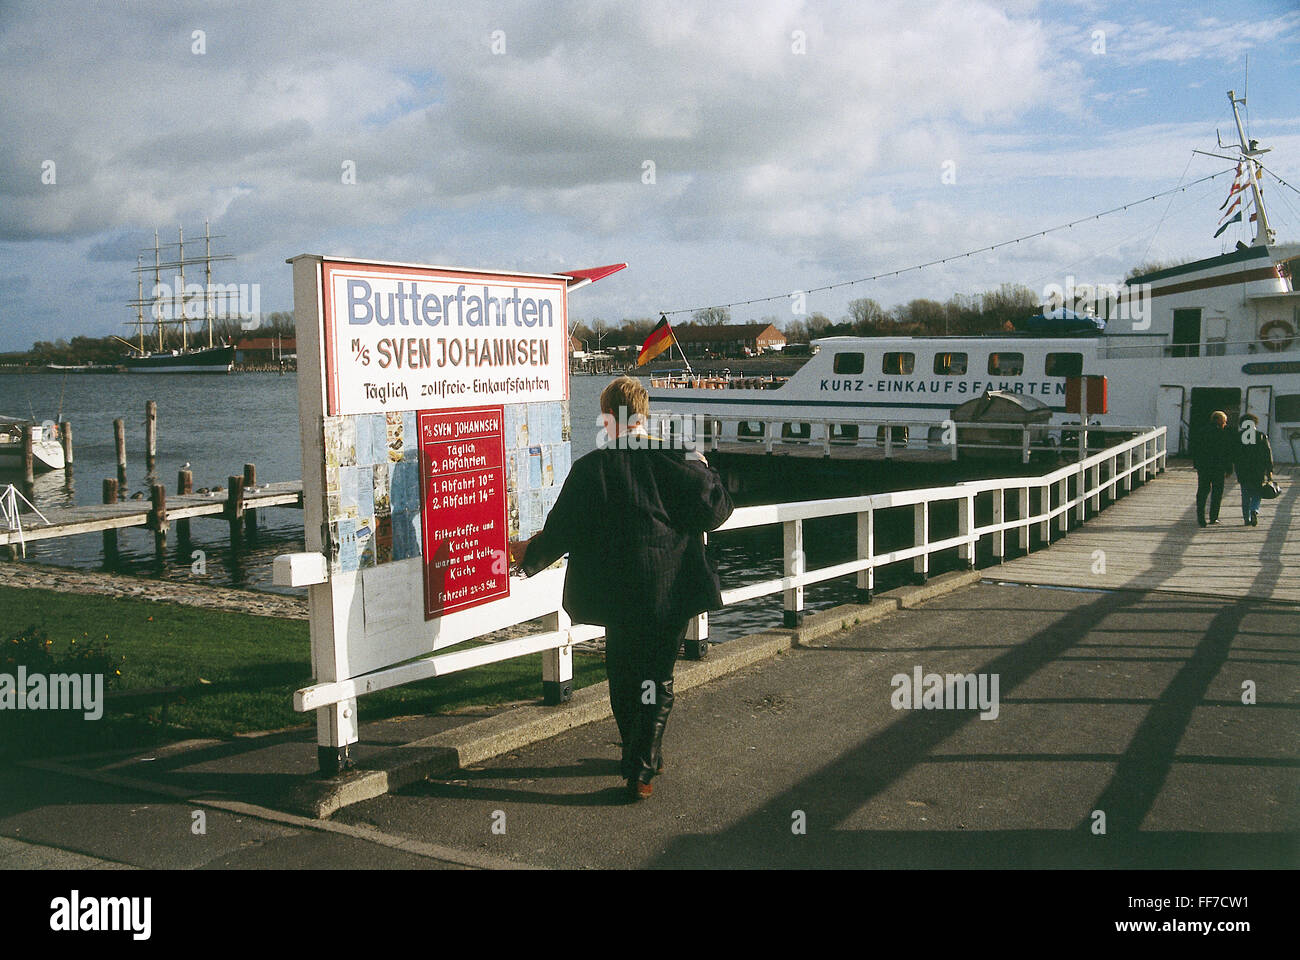 transport / transportation, navigation, harbor, embarkation point of a shopping excursion buy cheap duty-free goods, Lübeck - Travemünde, Germany, circa 1987, Additional-Rights-Clearences-Not Available Stock Photo